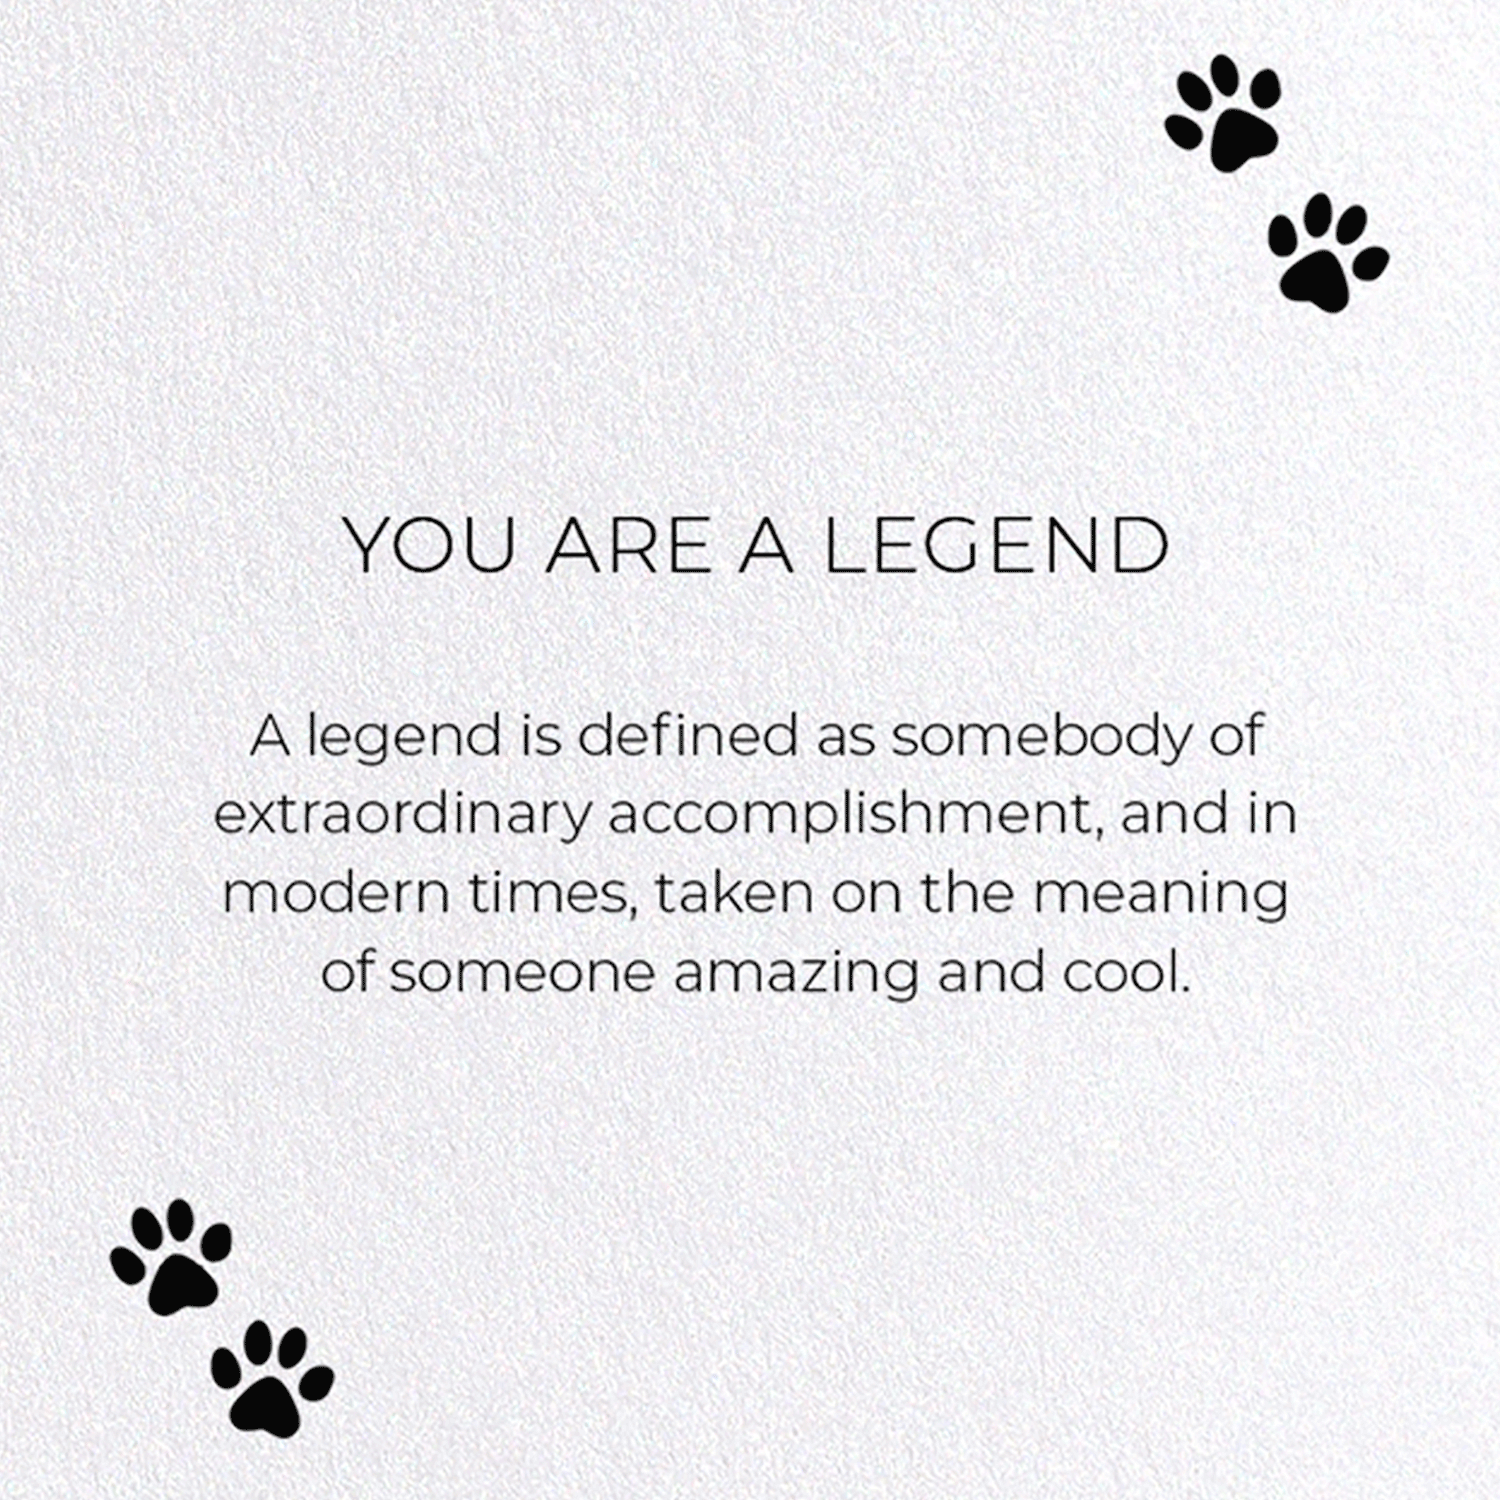 YOU ARE A LEGEND